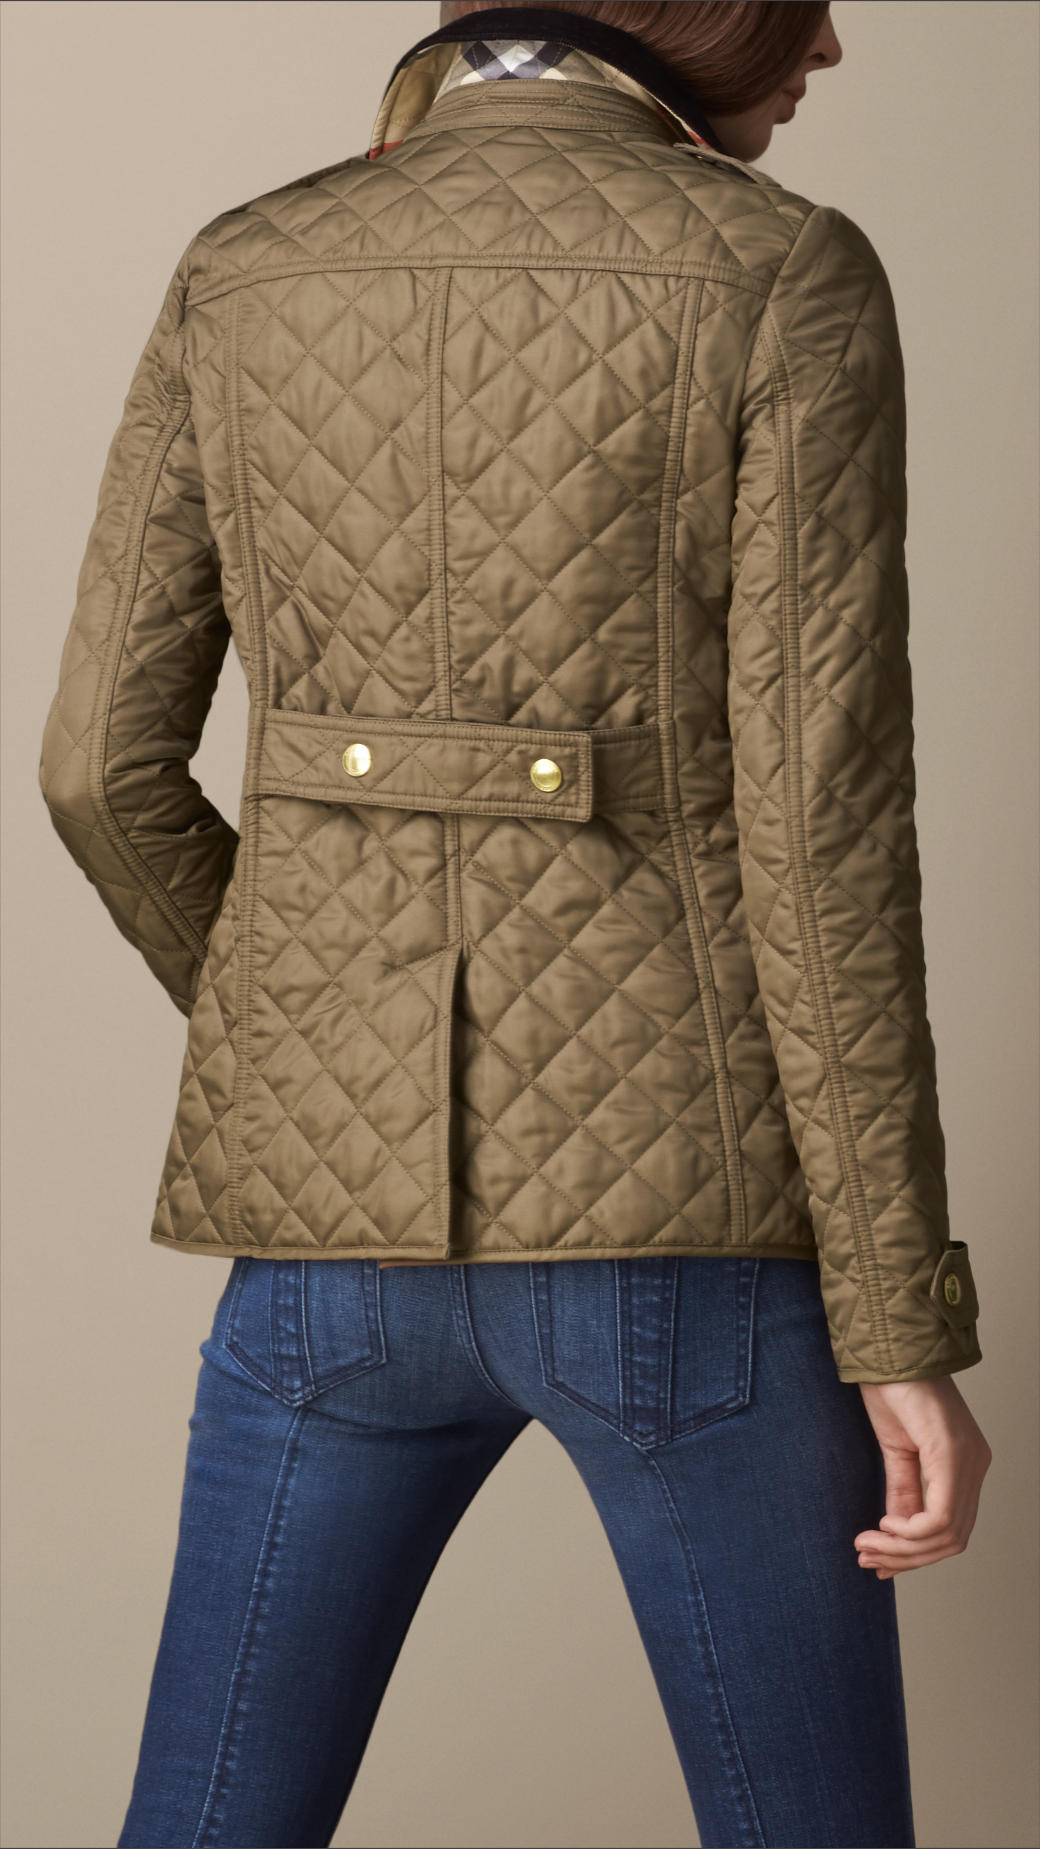 Burberry Corduroy Collar Quilted Jacket in Military Khaki (Natural) - Lyst